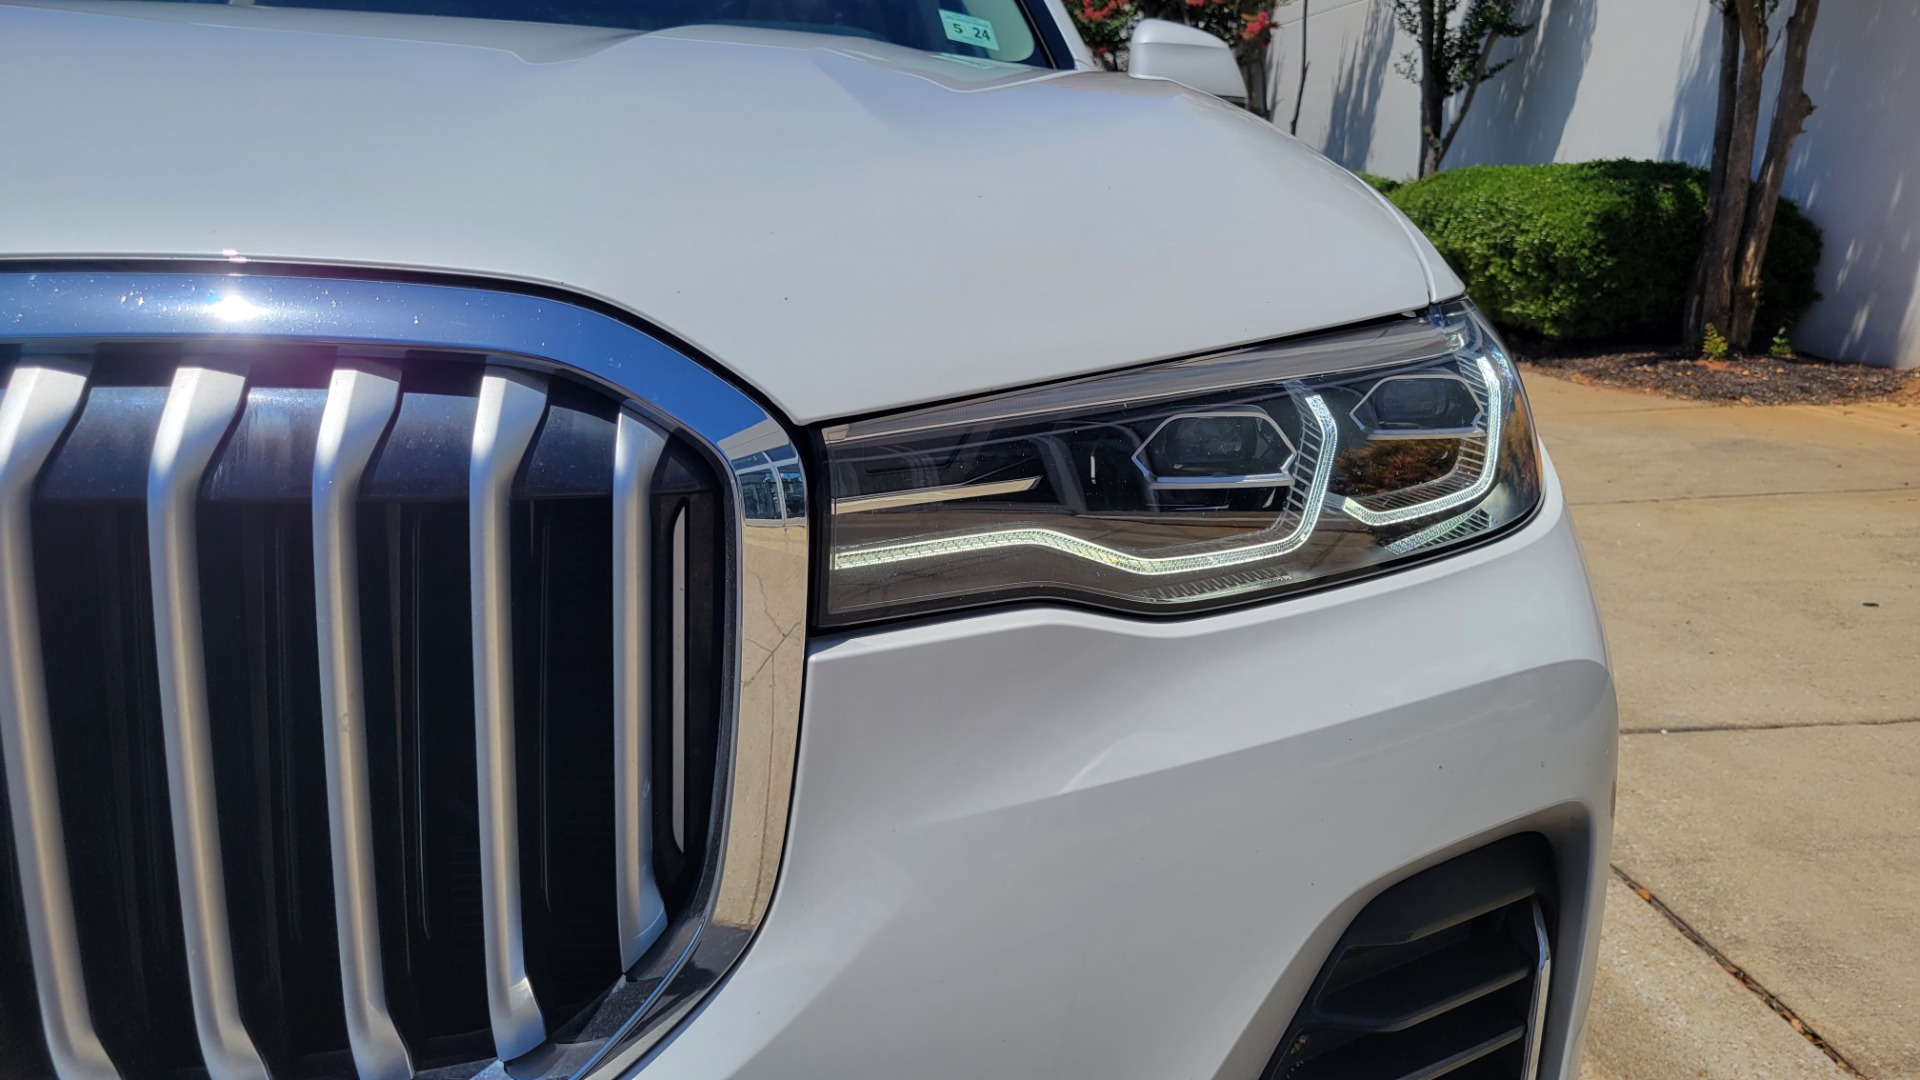 Used 2019 BMW X7 XDRIVE40I PREMIUM / NAV / HUD / PARK ASST PLUS / REMOTE START / 3D VIEW for sale $68,995 at Formula Imports in Charlotte NC 28227 35